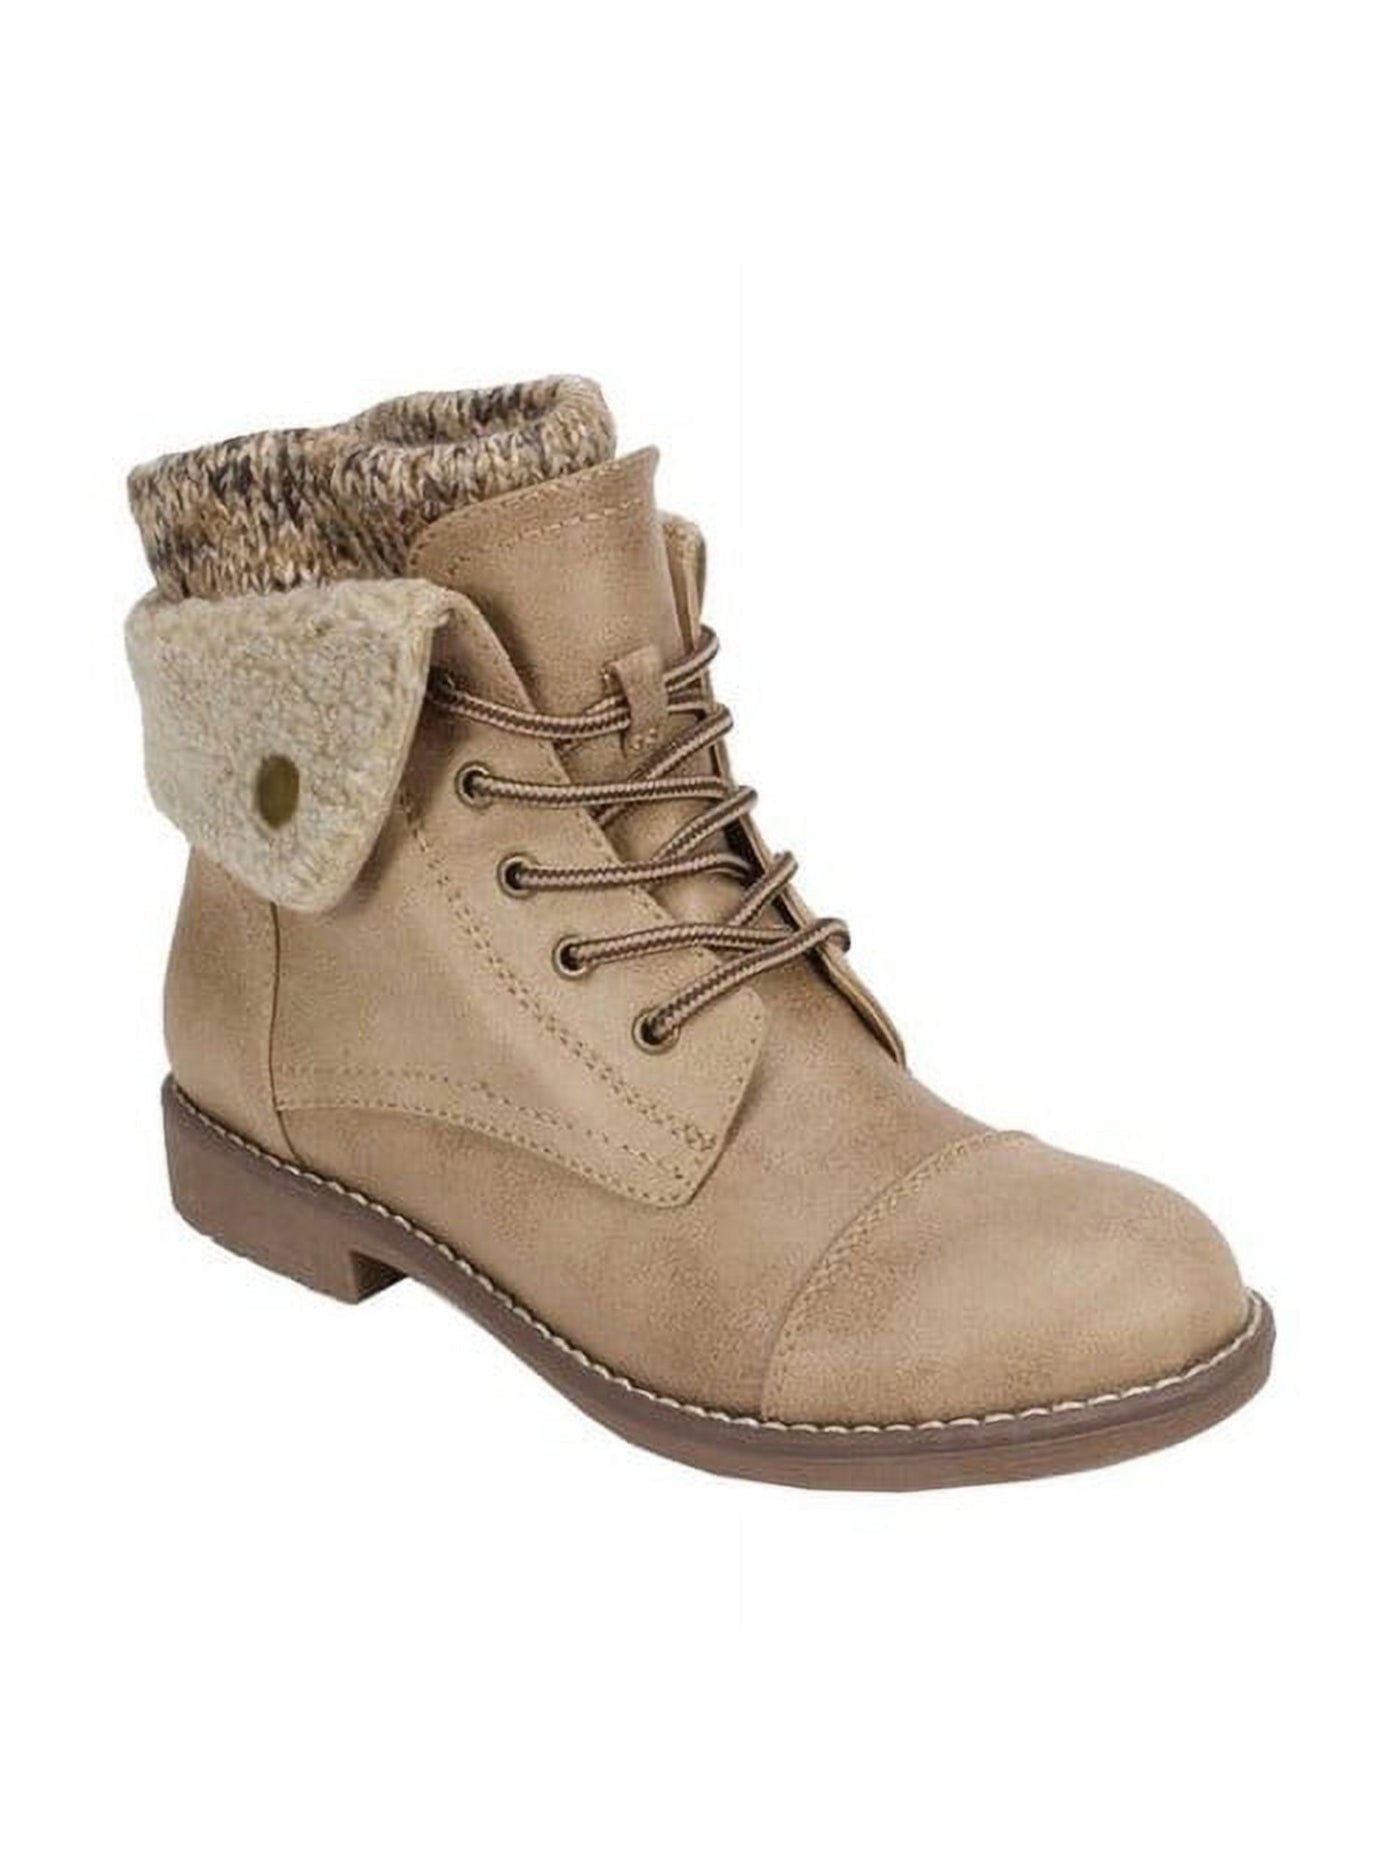 CLIFFS BY WHITE MOUNTAIN Womens Beige Sweater Ankle Trim Snap Collar Padded Duena Round Toe Block Heel Lace-Up Hiking Boots 10 W